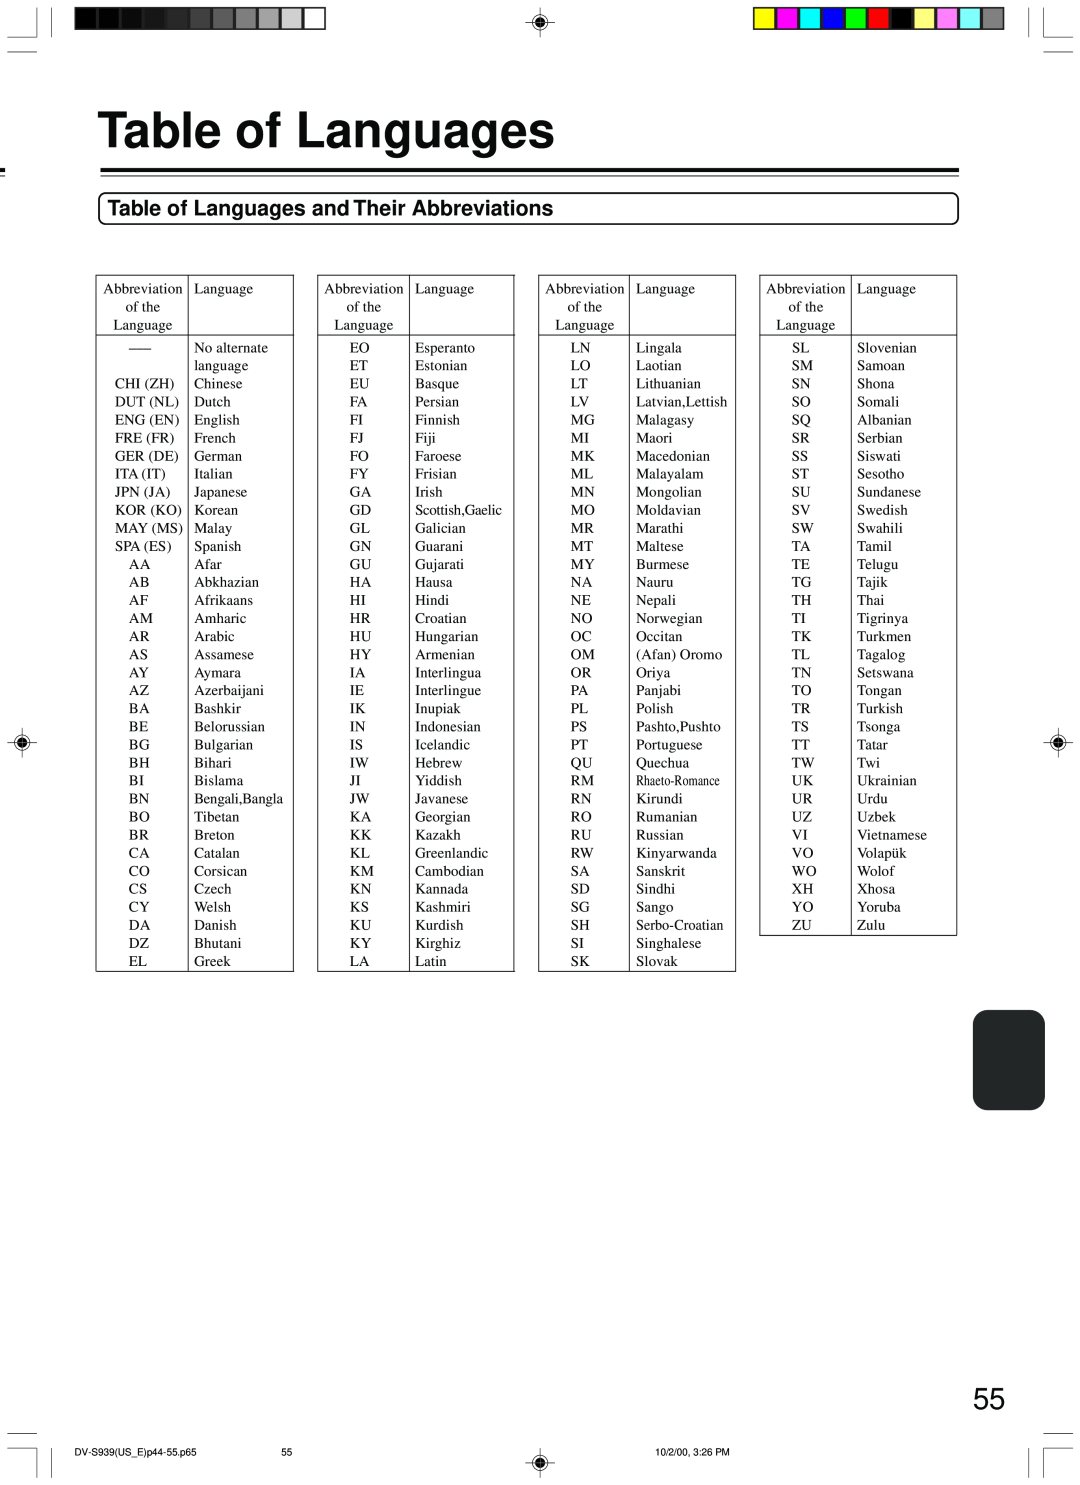 Onkyo DV-S939 instruction manual Table of Languages and Their Abbreviations 